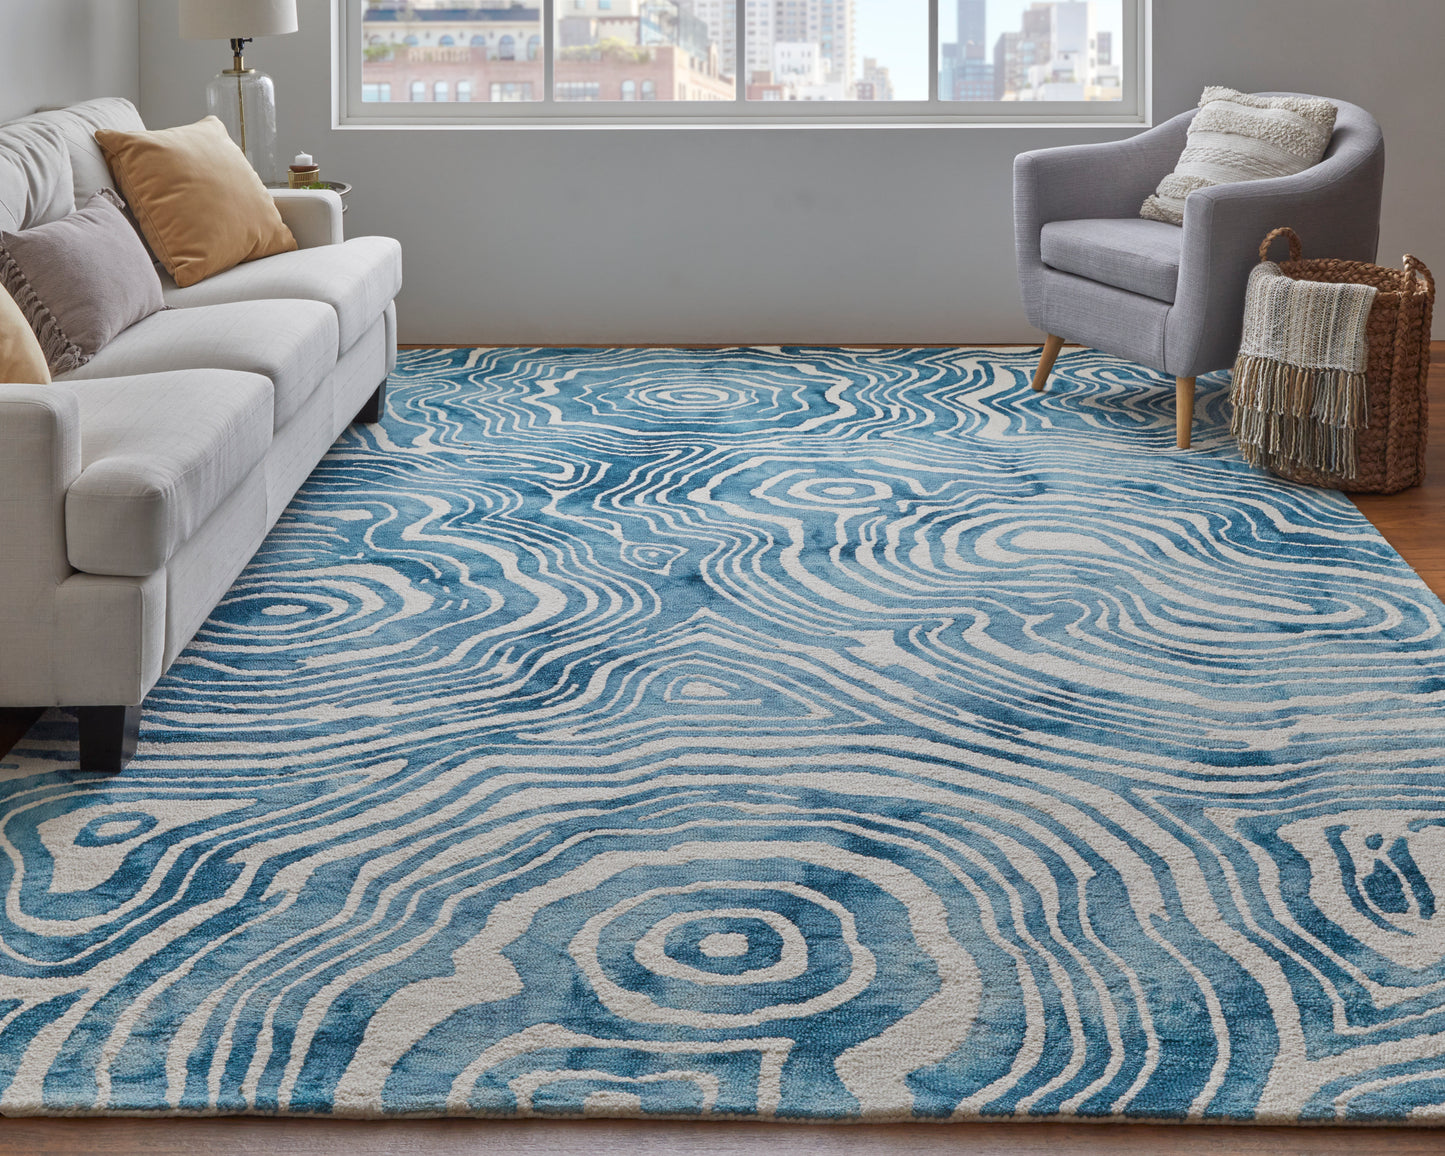 Lorrain 8920F Hand Tufted Wool Indoor Area Rug by Feizy Rugs